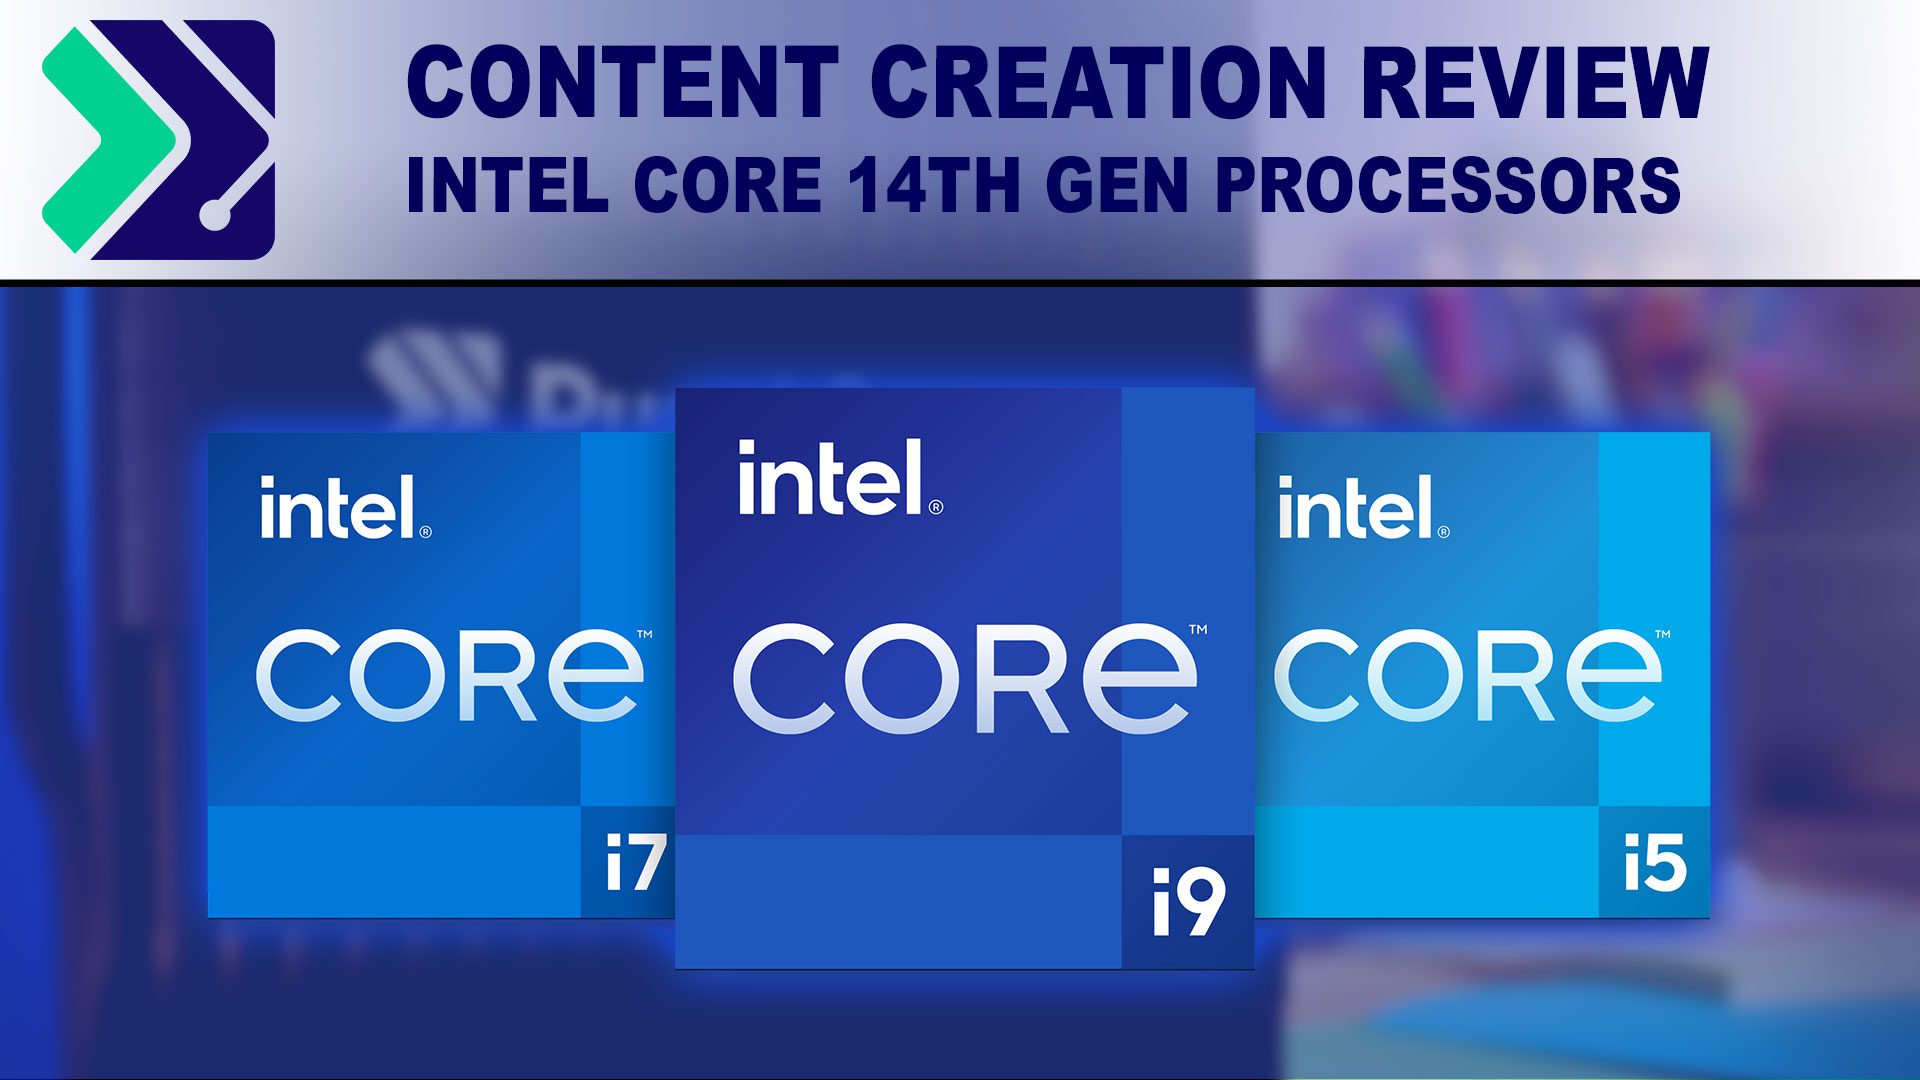 Intel's 13th-gen CPUs offer up to 24 cores and 5.8GHz speeds